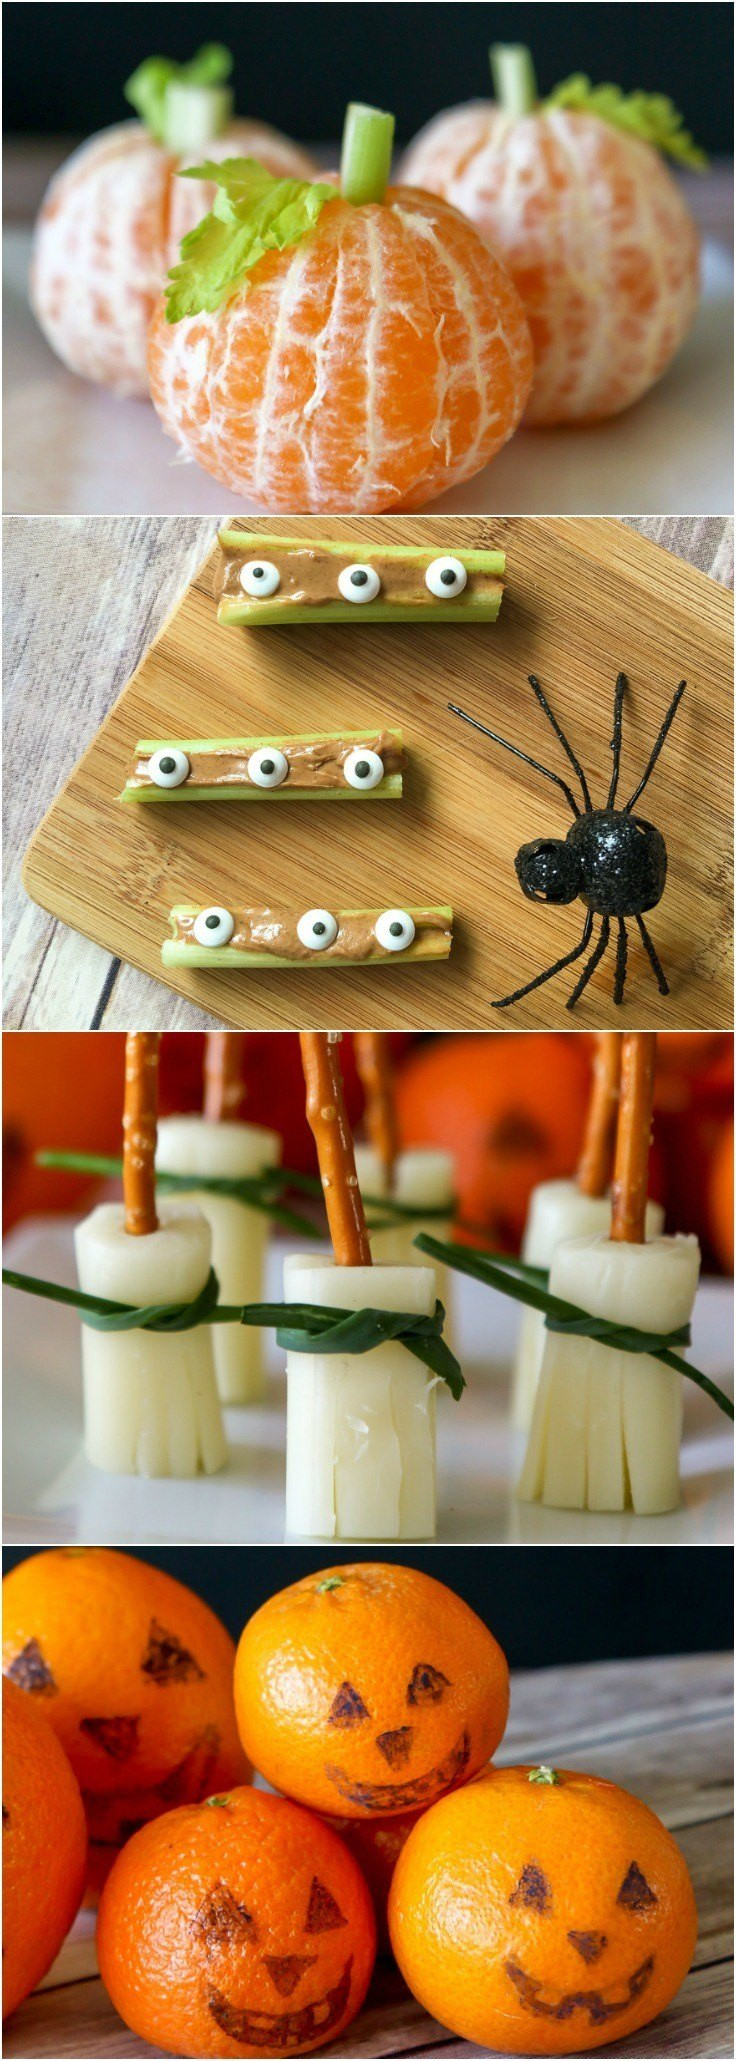 Healthy Halloween Snacks For School
 5 Easy and Healthy Halloween Snacks for Kids La Jolla Mom